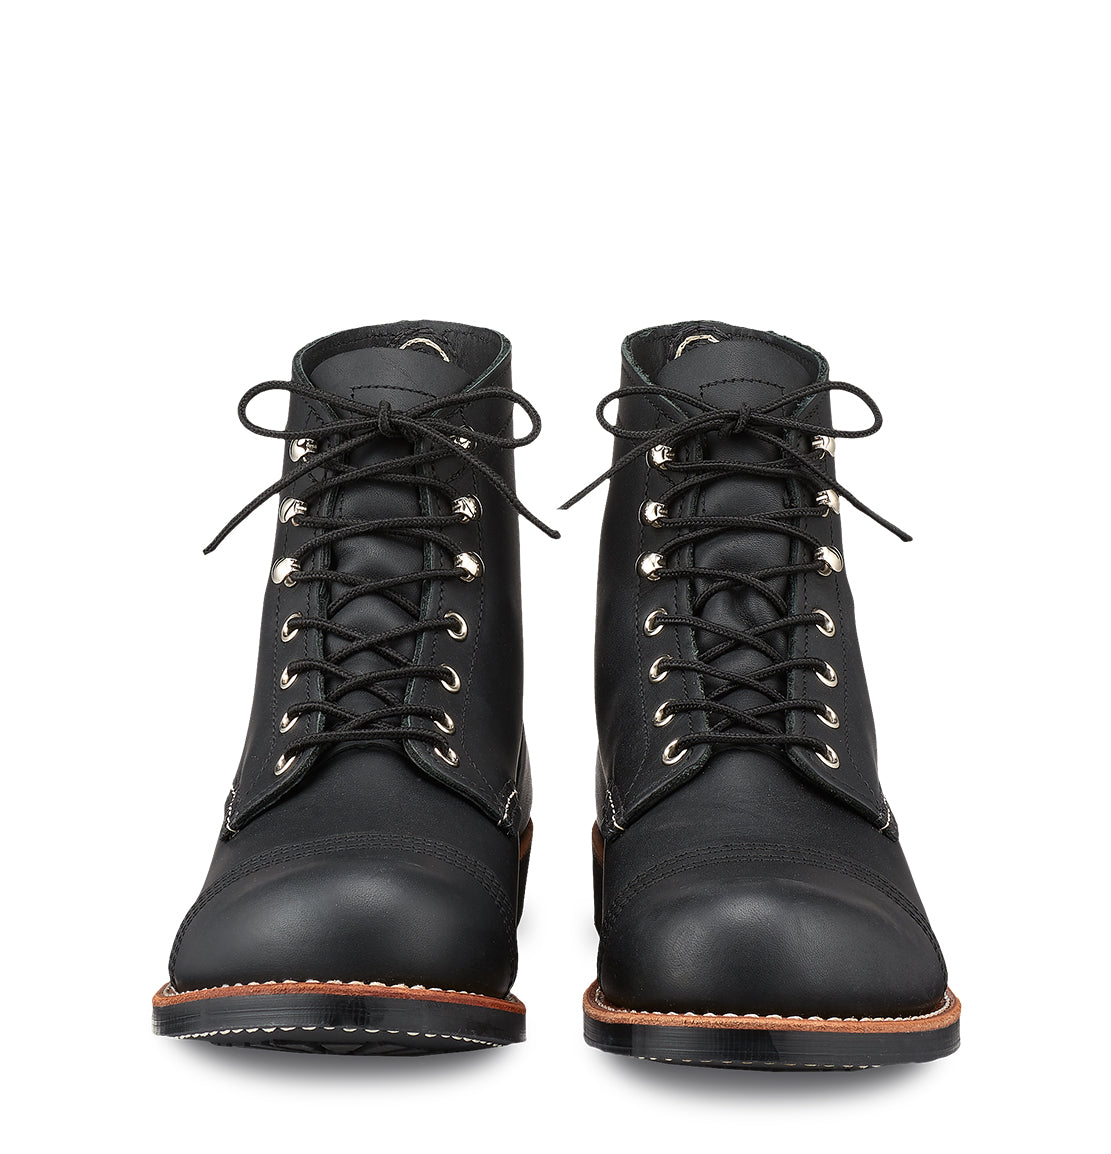 Black Redwing boots